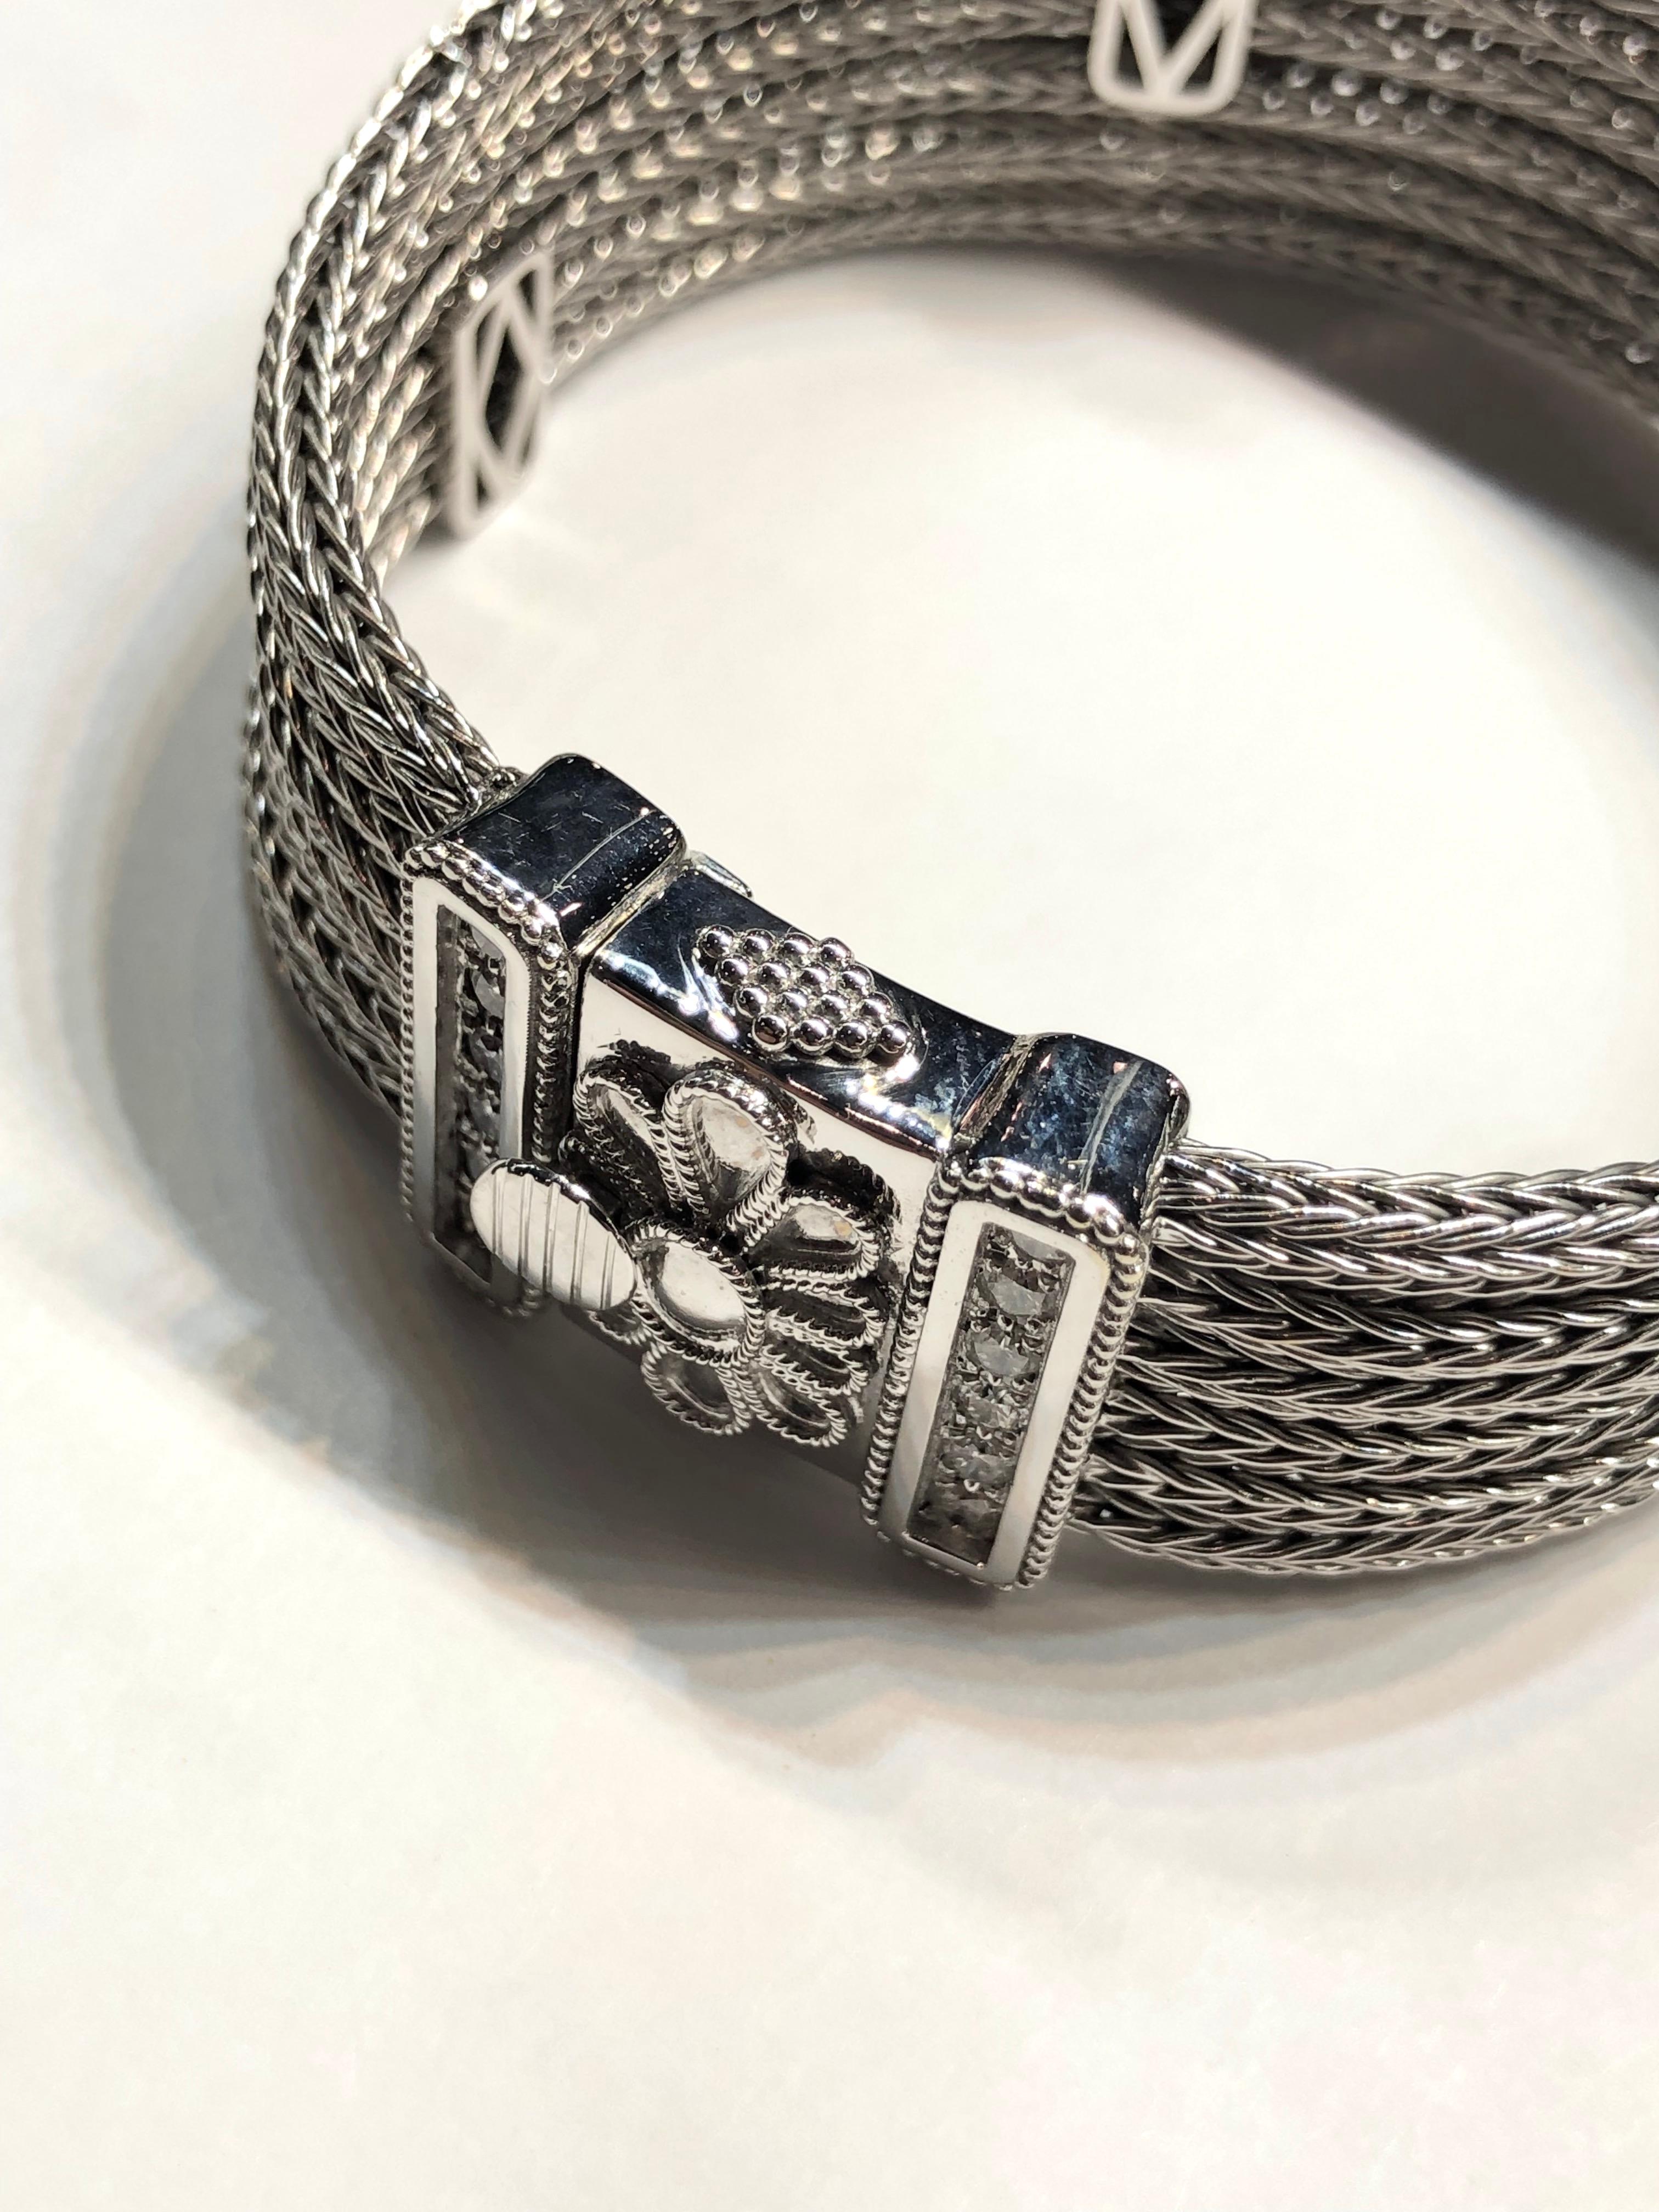 S.Georgios designer handmade bracelet from 18 Karat white gold knitted in our workshop in Greece. This flexible bracelet is made from white gold threads knitted to ropes and decorated with 1.05 Carat Brilliant Cut White Diamonds and Byzantine